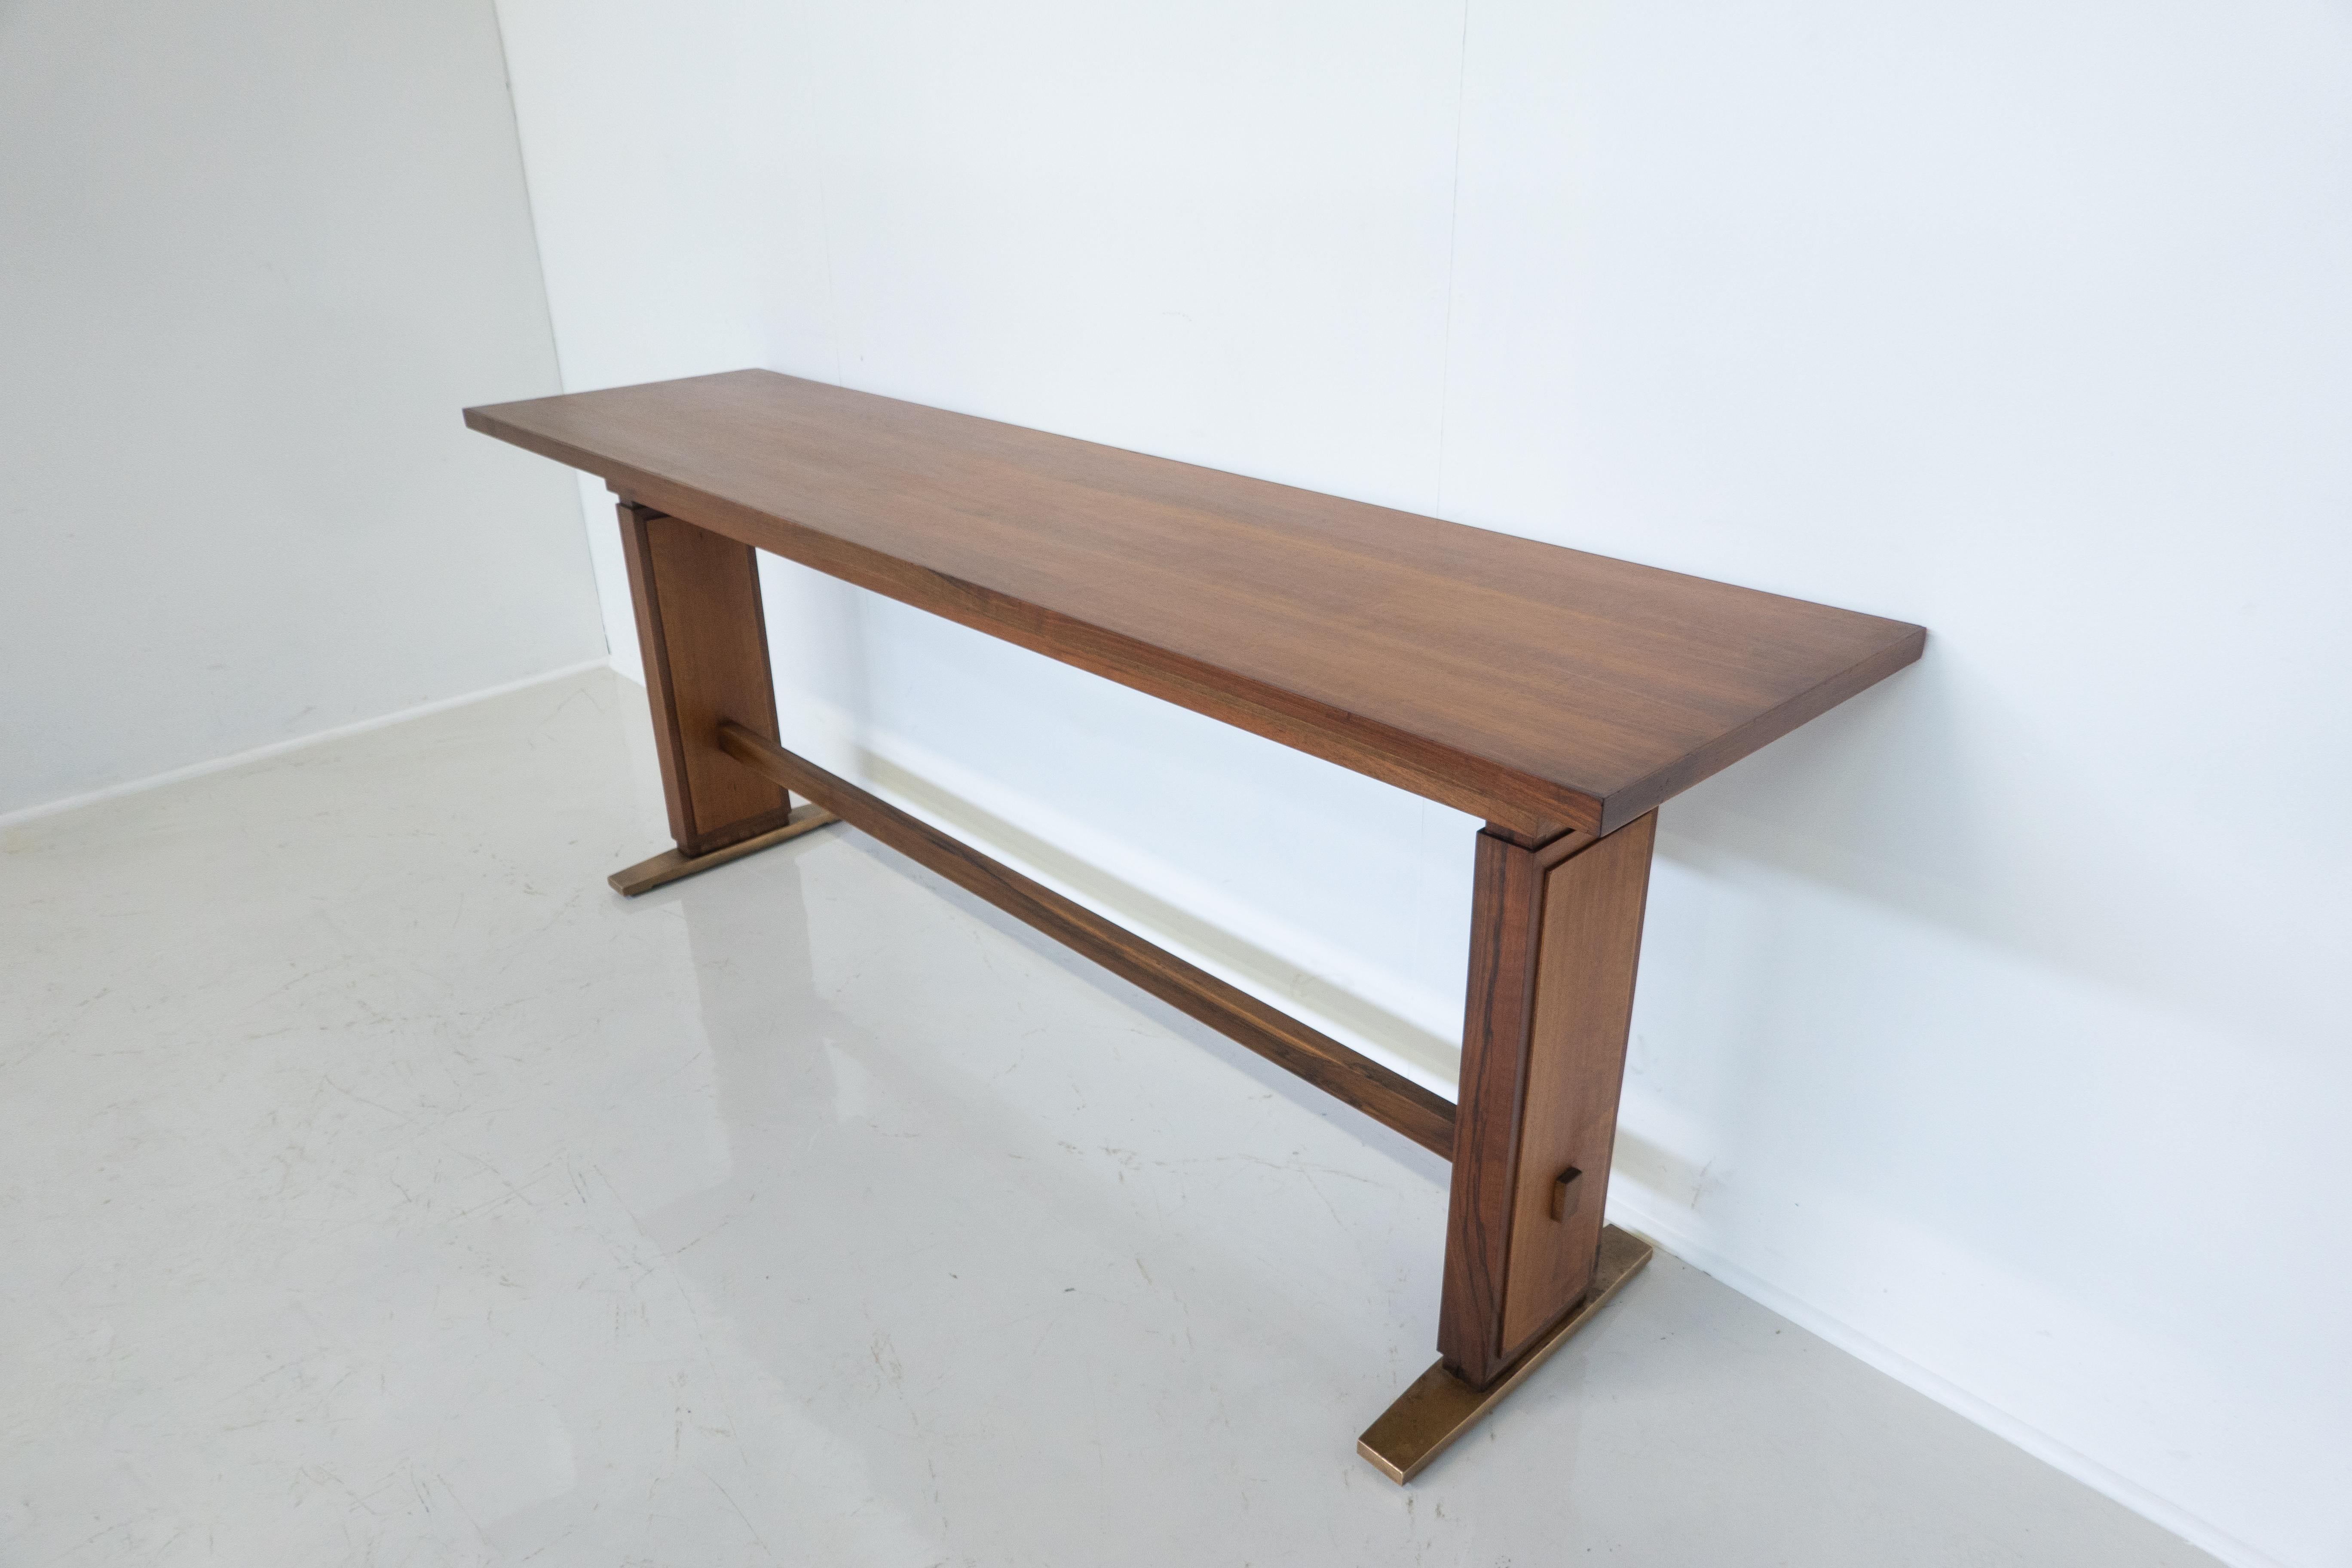 Italian Mid-Century Modern Wooden Console Table by Giovanni Michelucci, 1960s For Sale